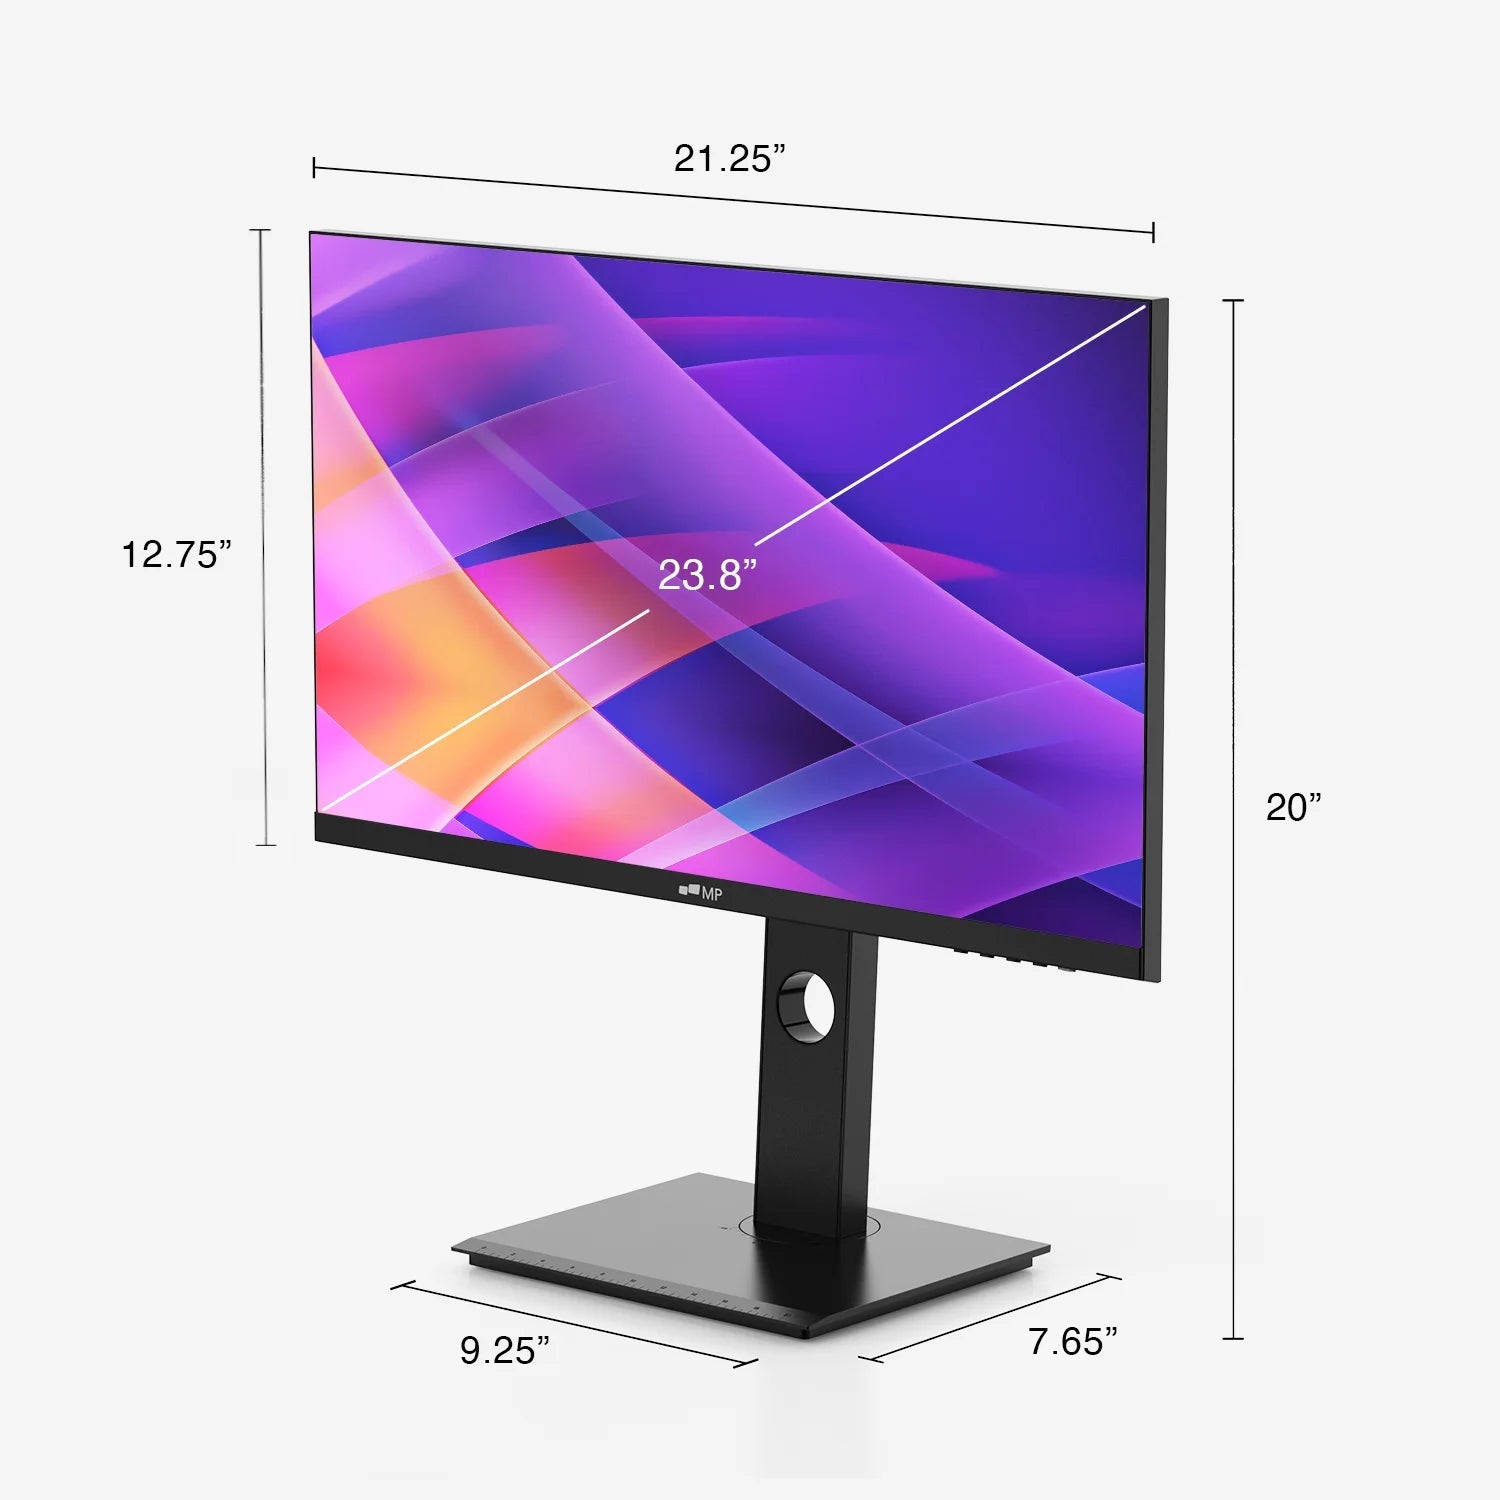 Size of MP 24 inch desktop monitor